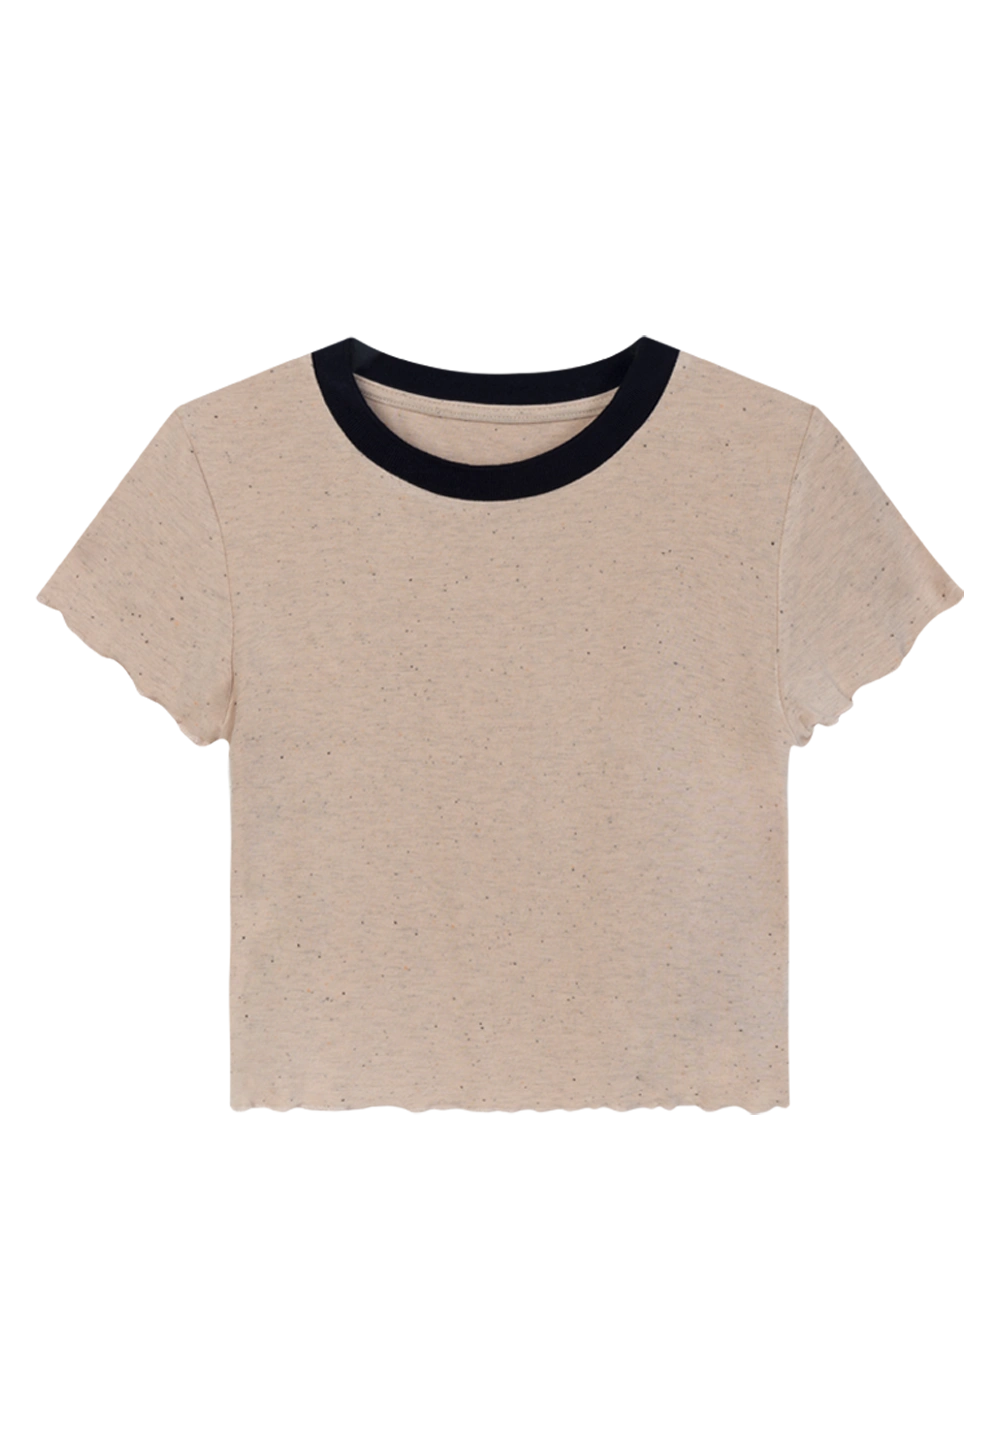 Women's Contrast Crew Neck T-Shirt - Casual Chic Style